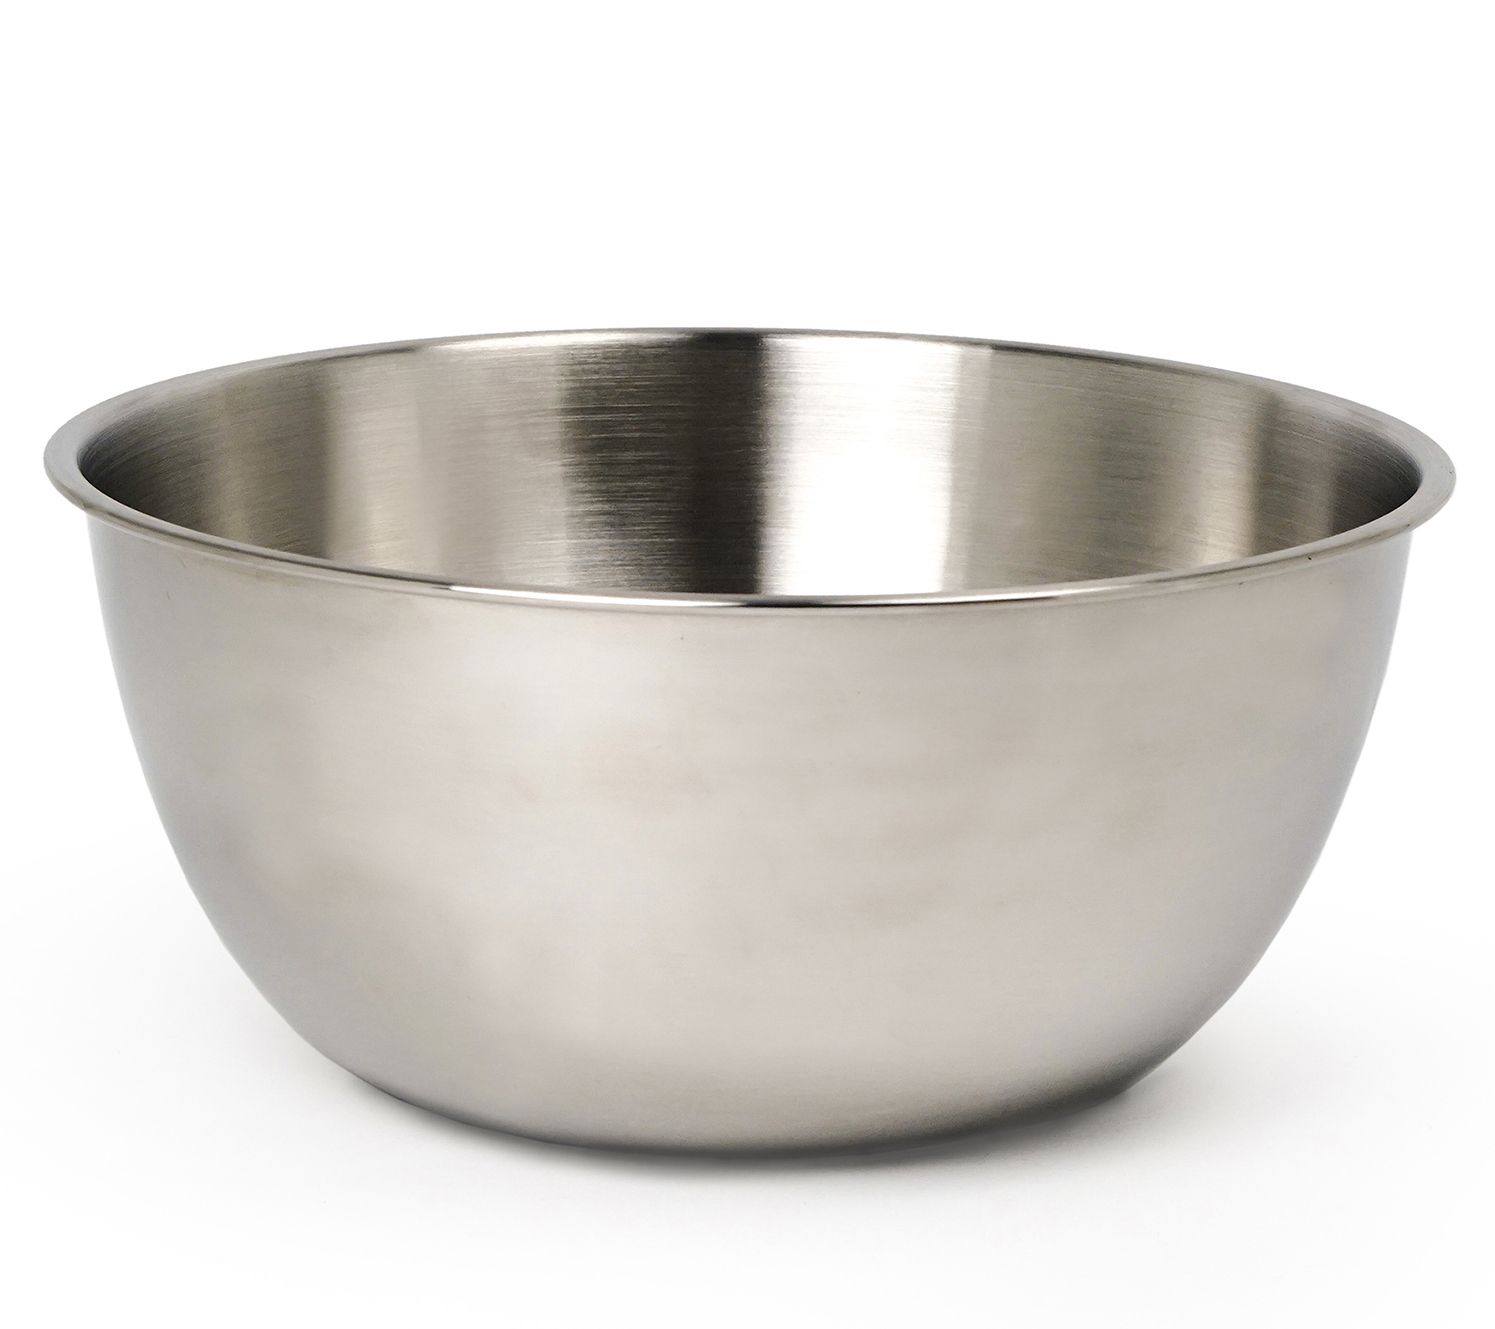 Tramontina Gourmet 8 qt. Stainless Steel Mixing Bowl